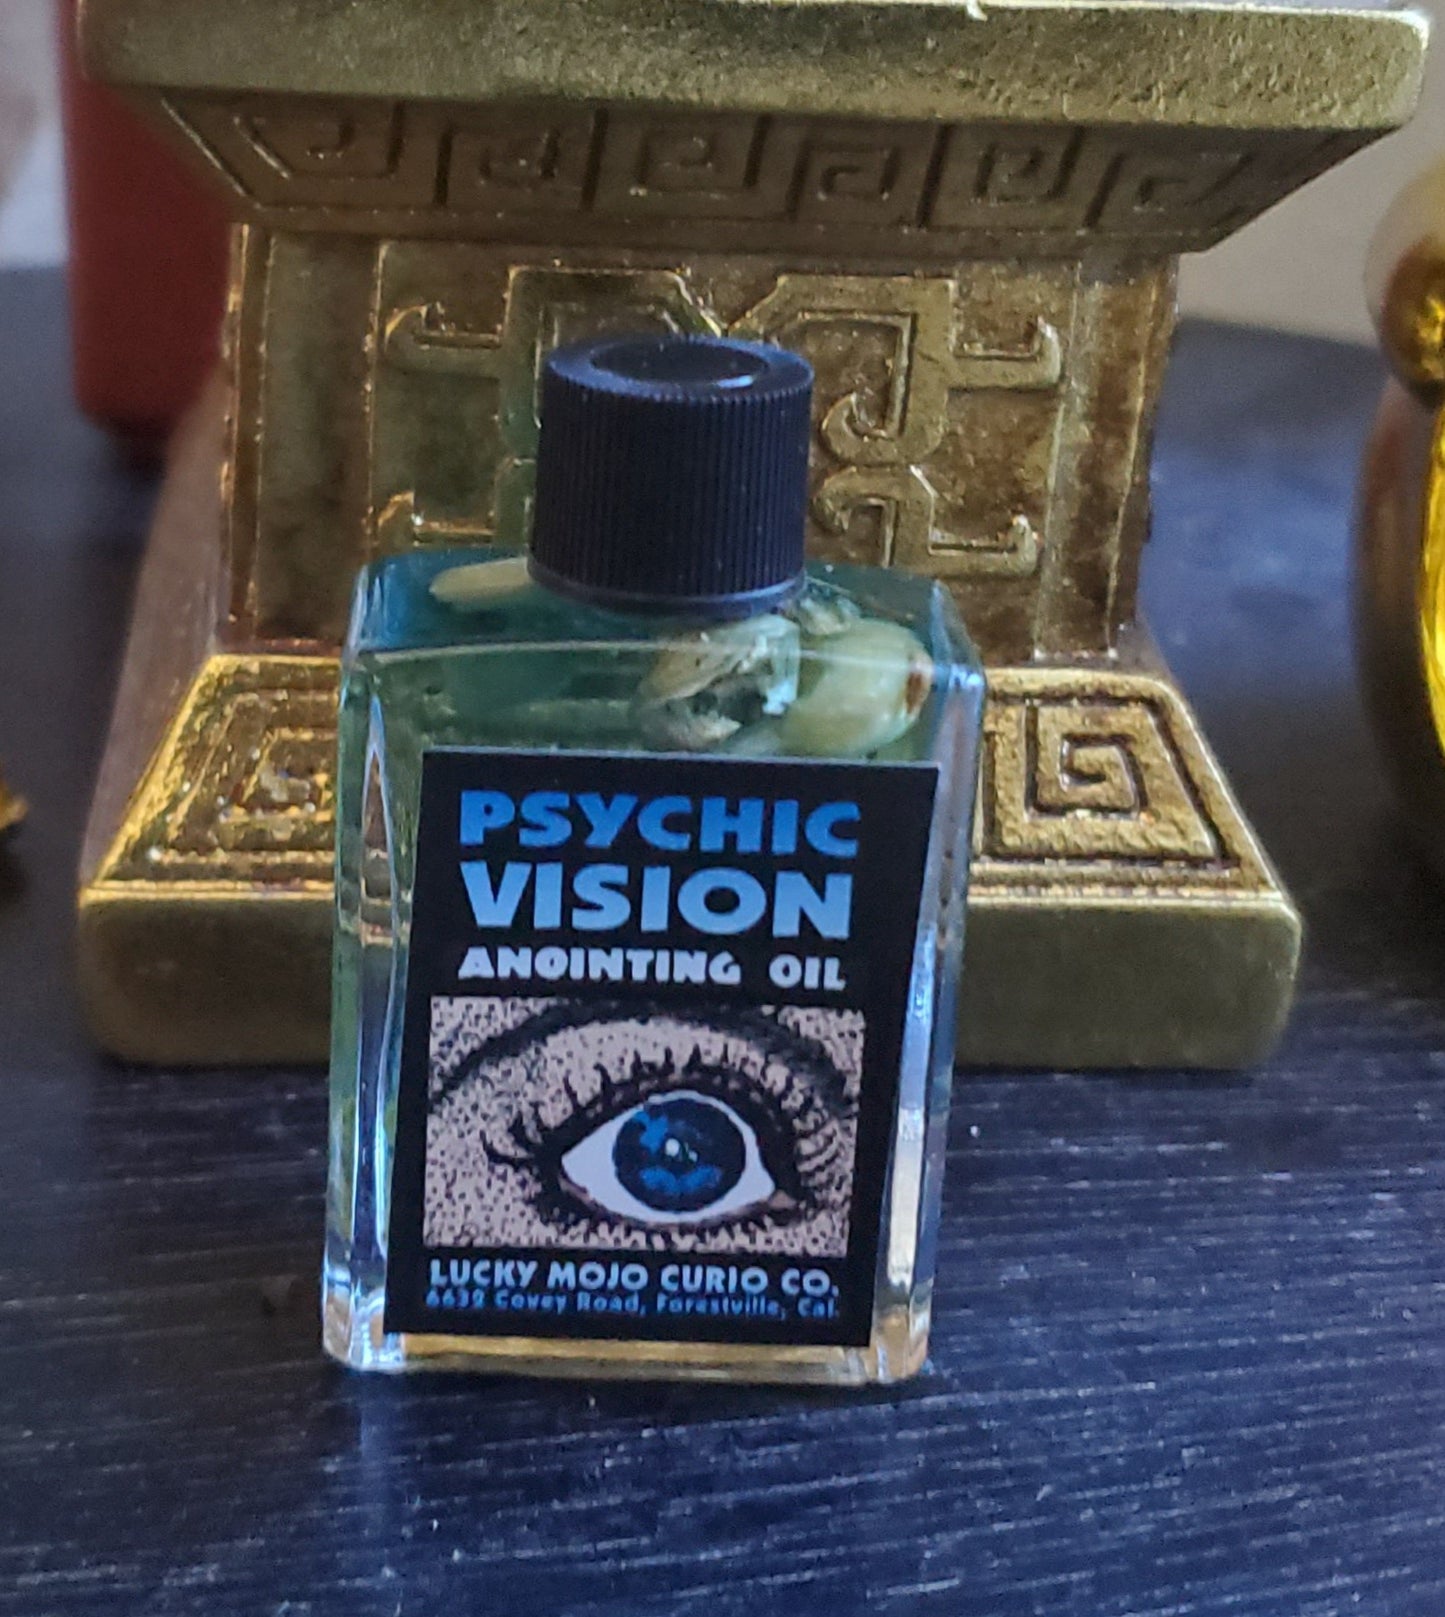 #LuckyMojoCurioCo "Psychic Vision" Anointing / Conjure Oil #GreatDeal